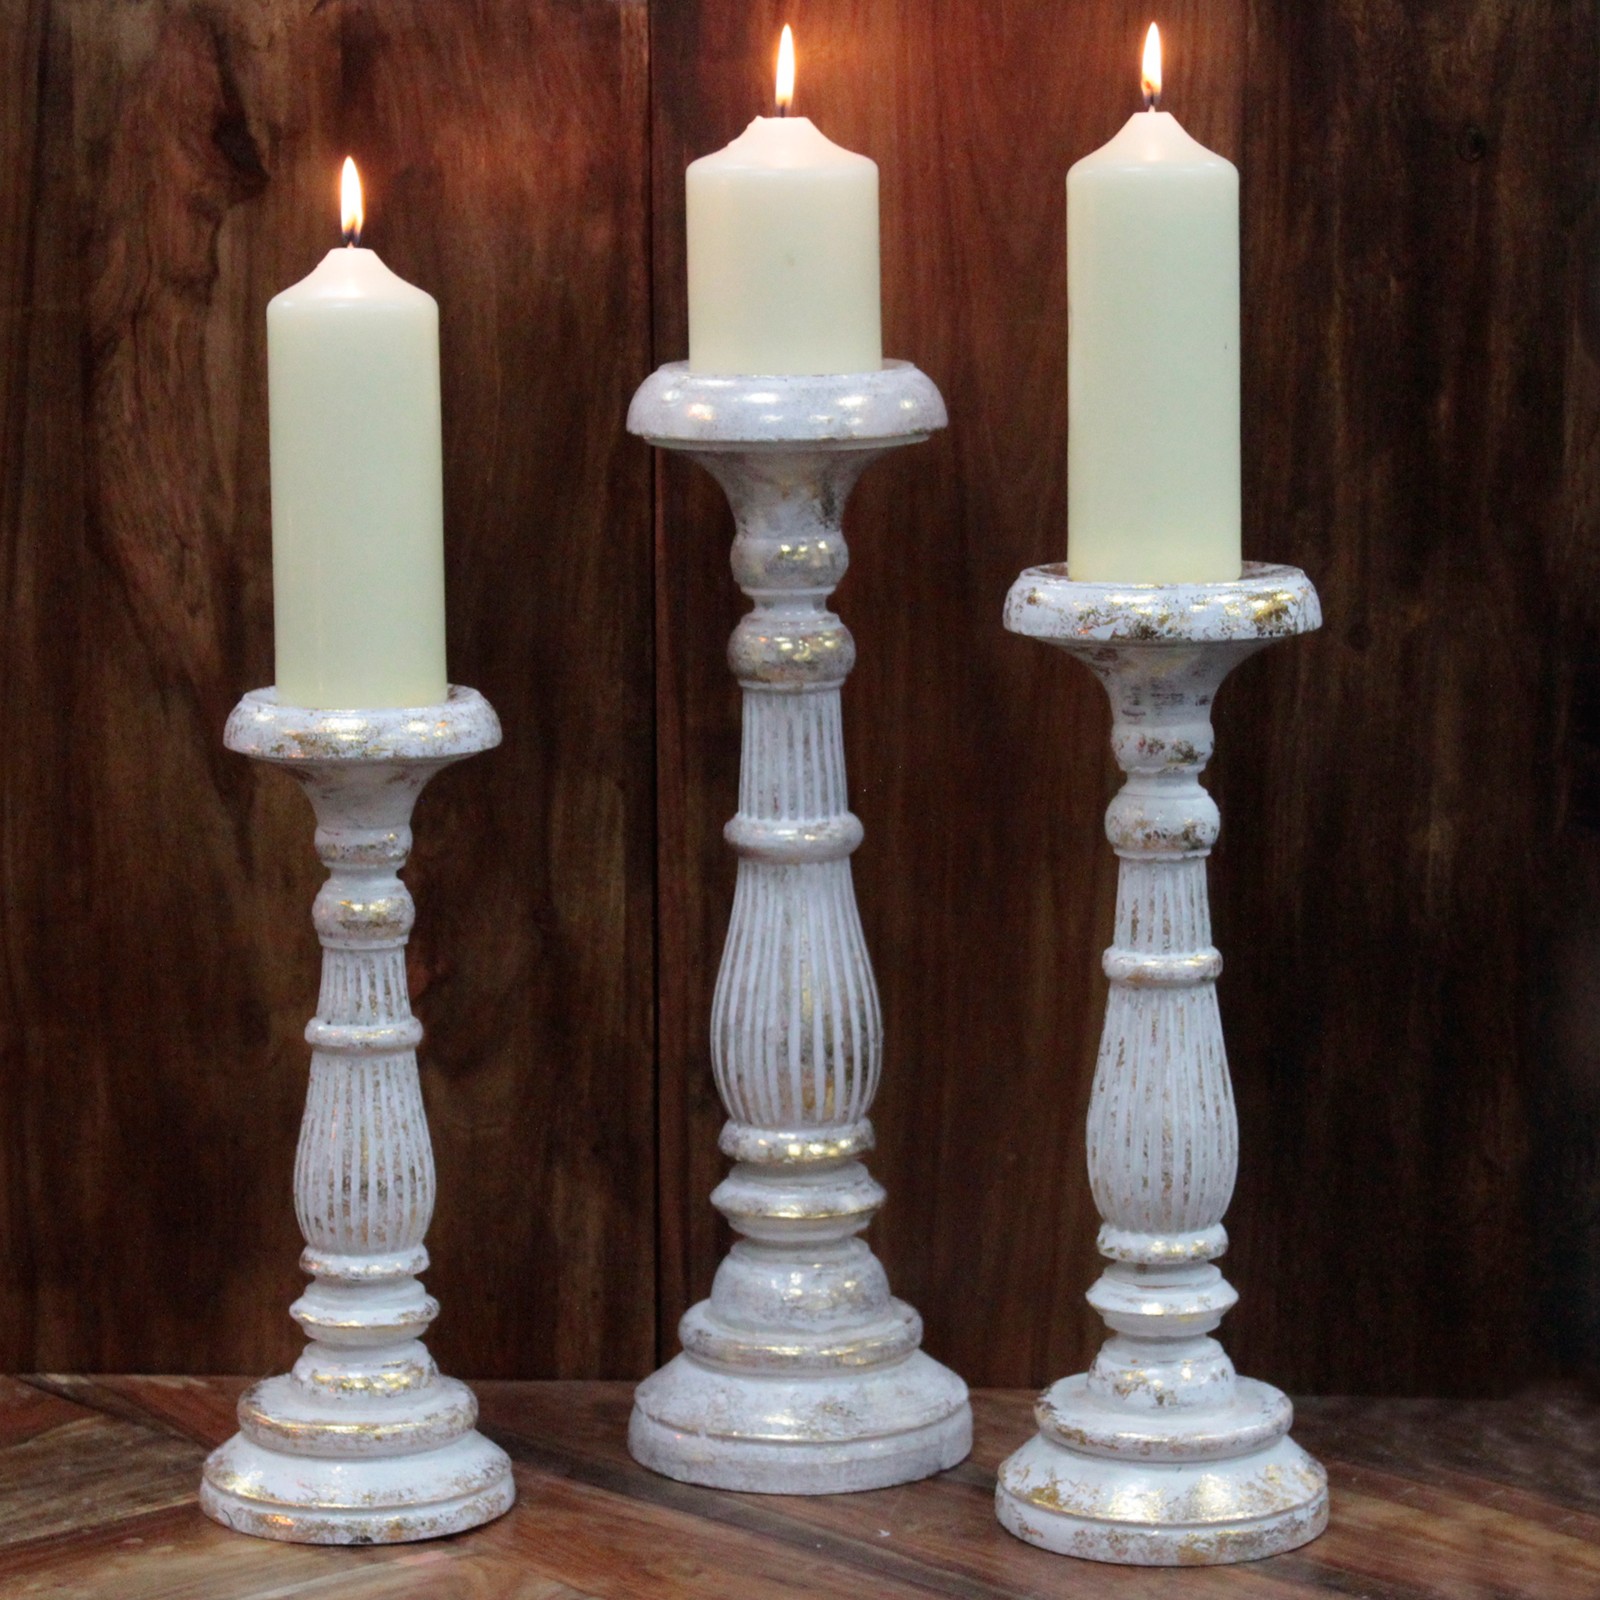 Large Candle Stand - White Gold - Ancient Wisdom - Wholesale Giftware